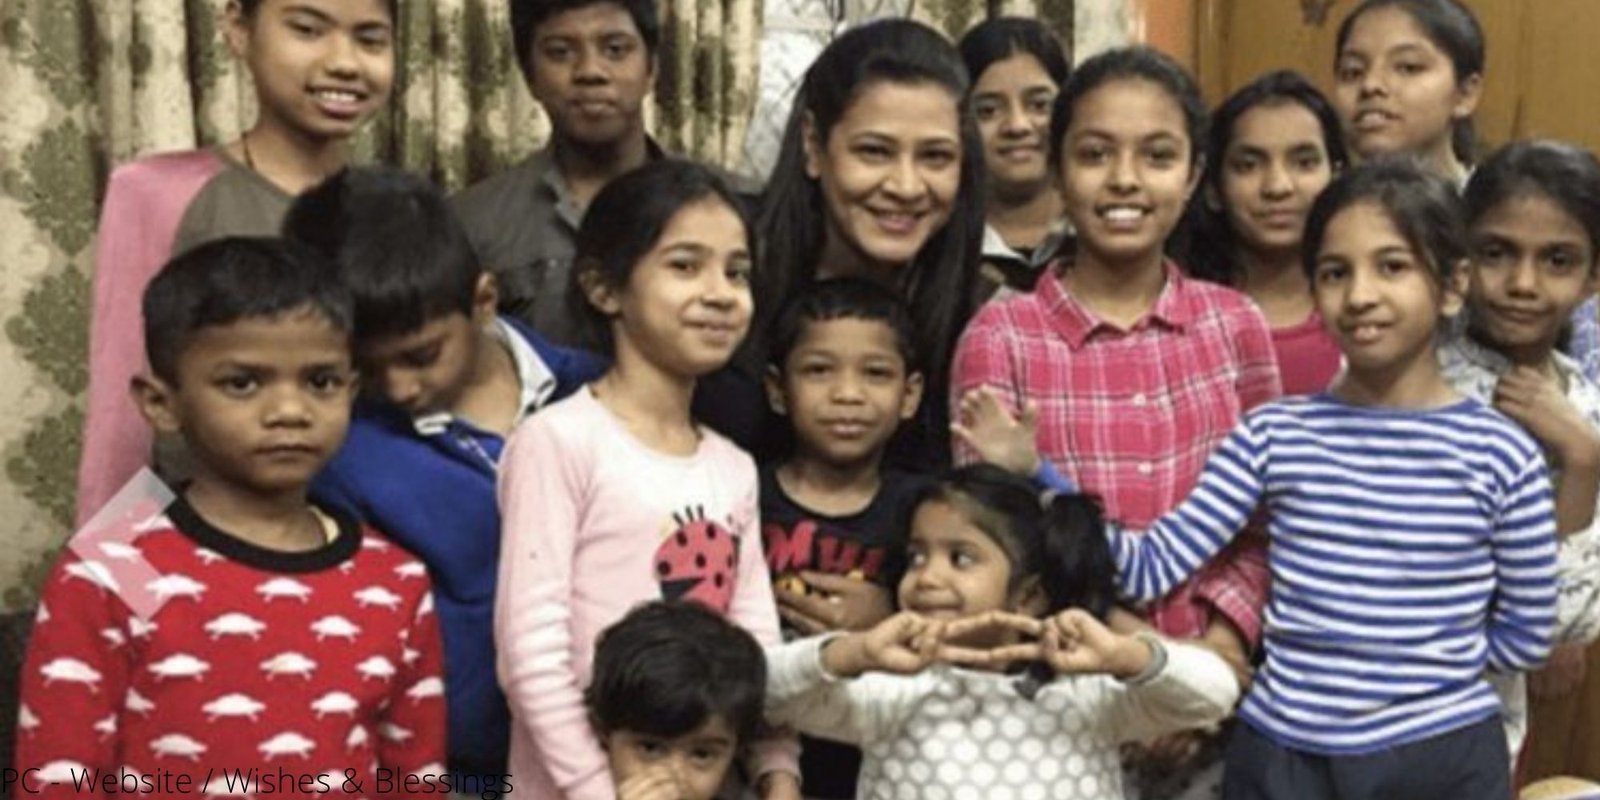 Geetanjali Chopra’s Wishes And Blessings Has Restored Smiles Of Over 1 Lakh Underprivileged People